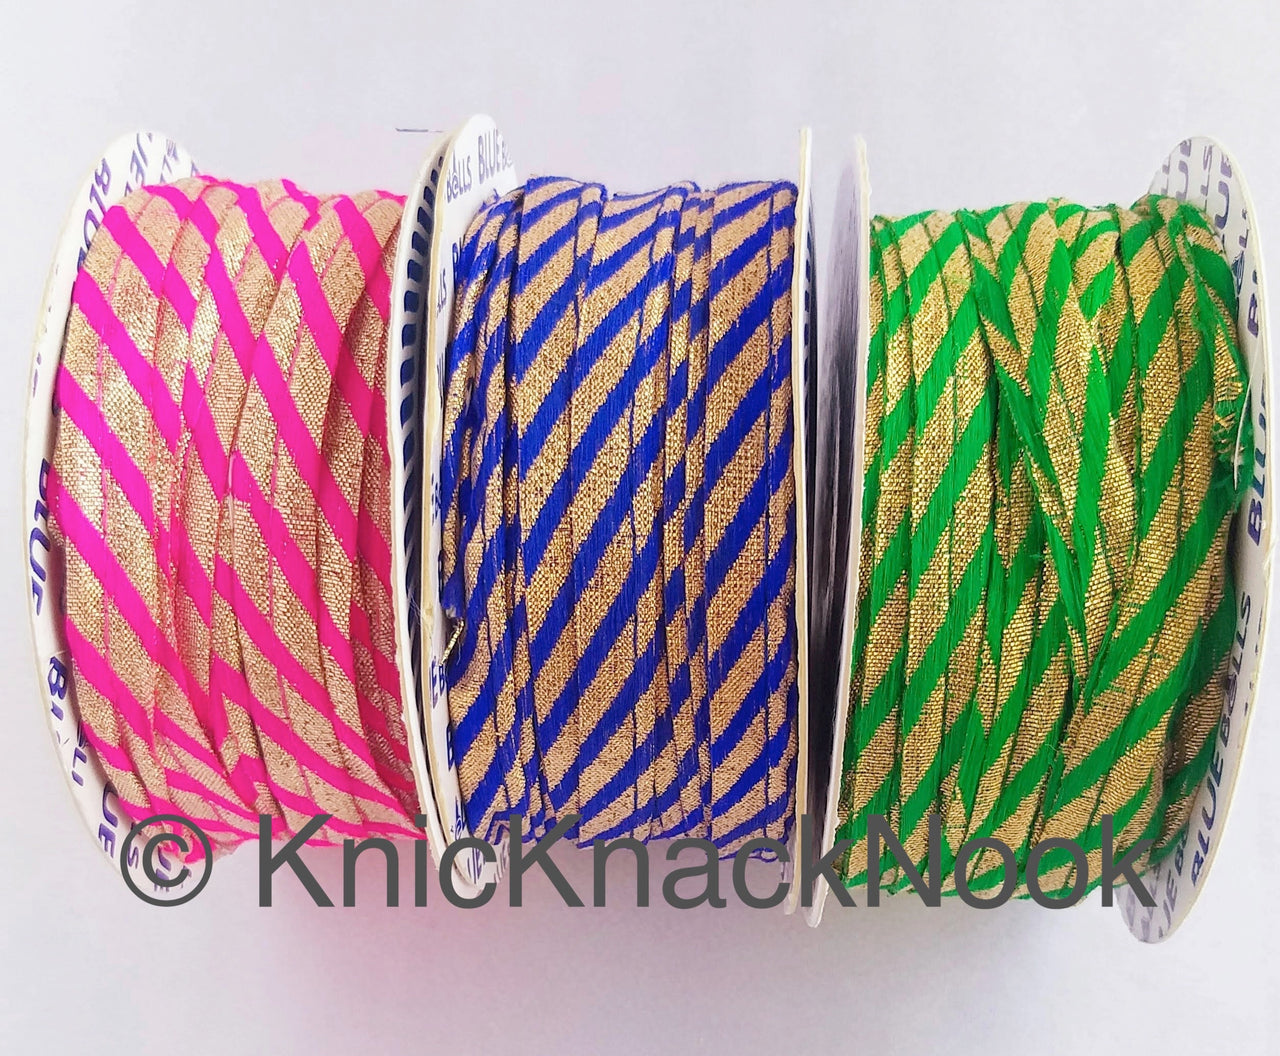 Wholesale 2mm Flanged Insertion Piping on 10mm Band Stripes Cord Trim, Cord Piping Trim, Decorative Sewing Edge Trim